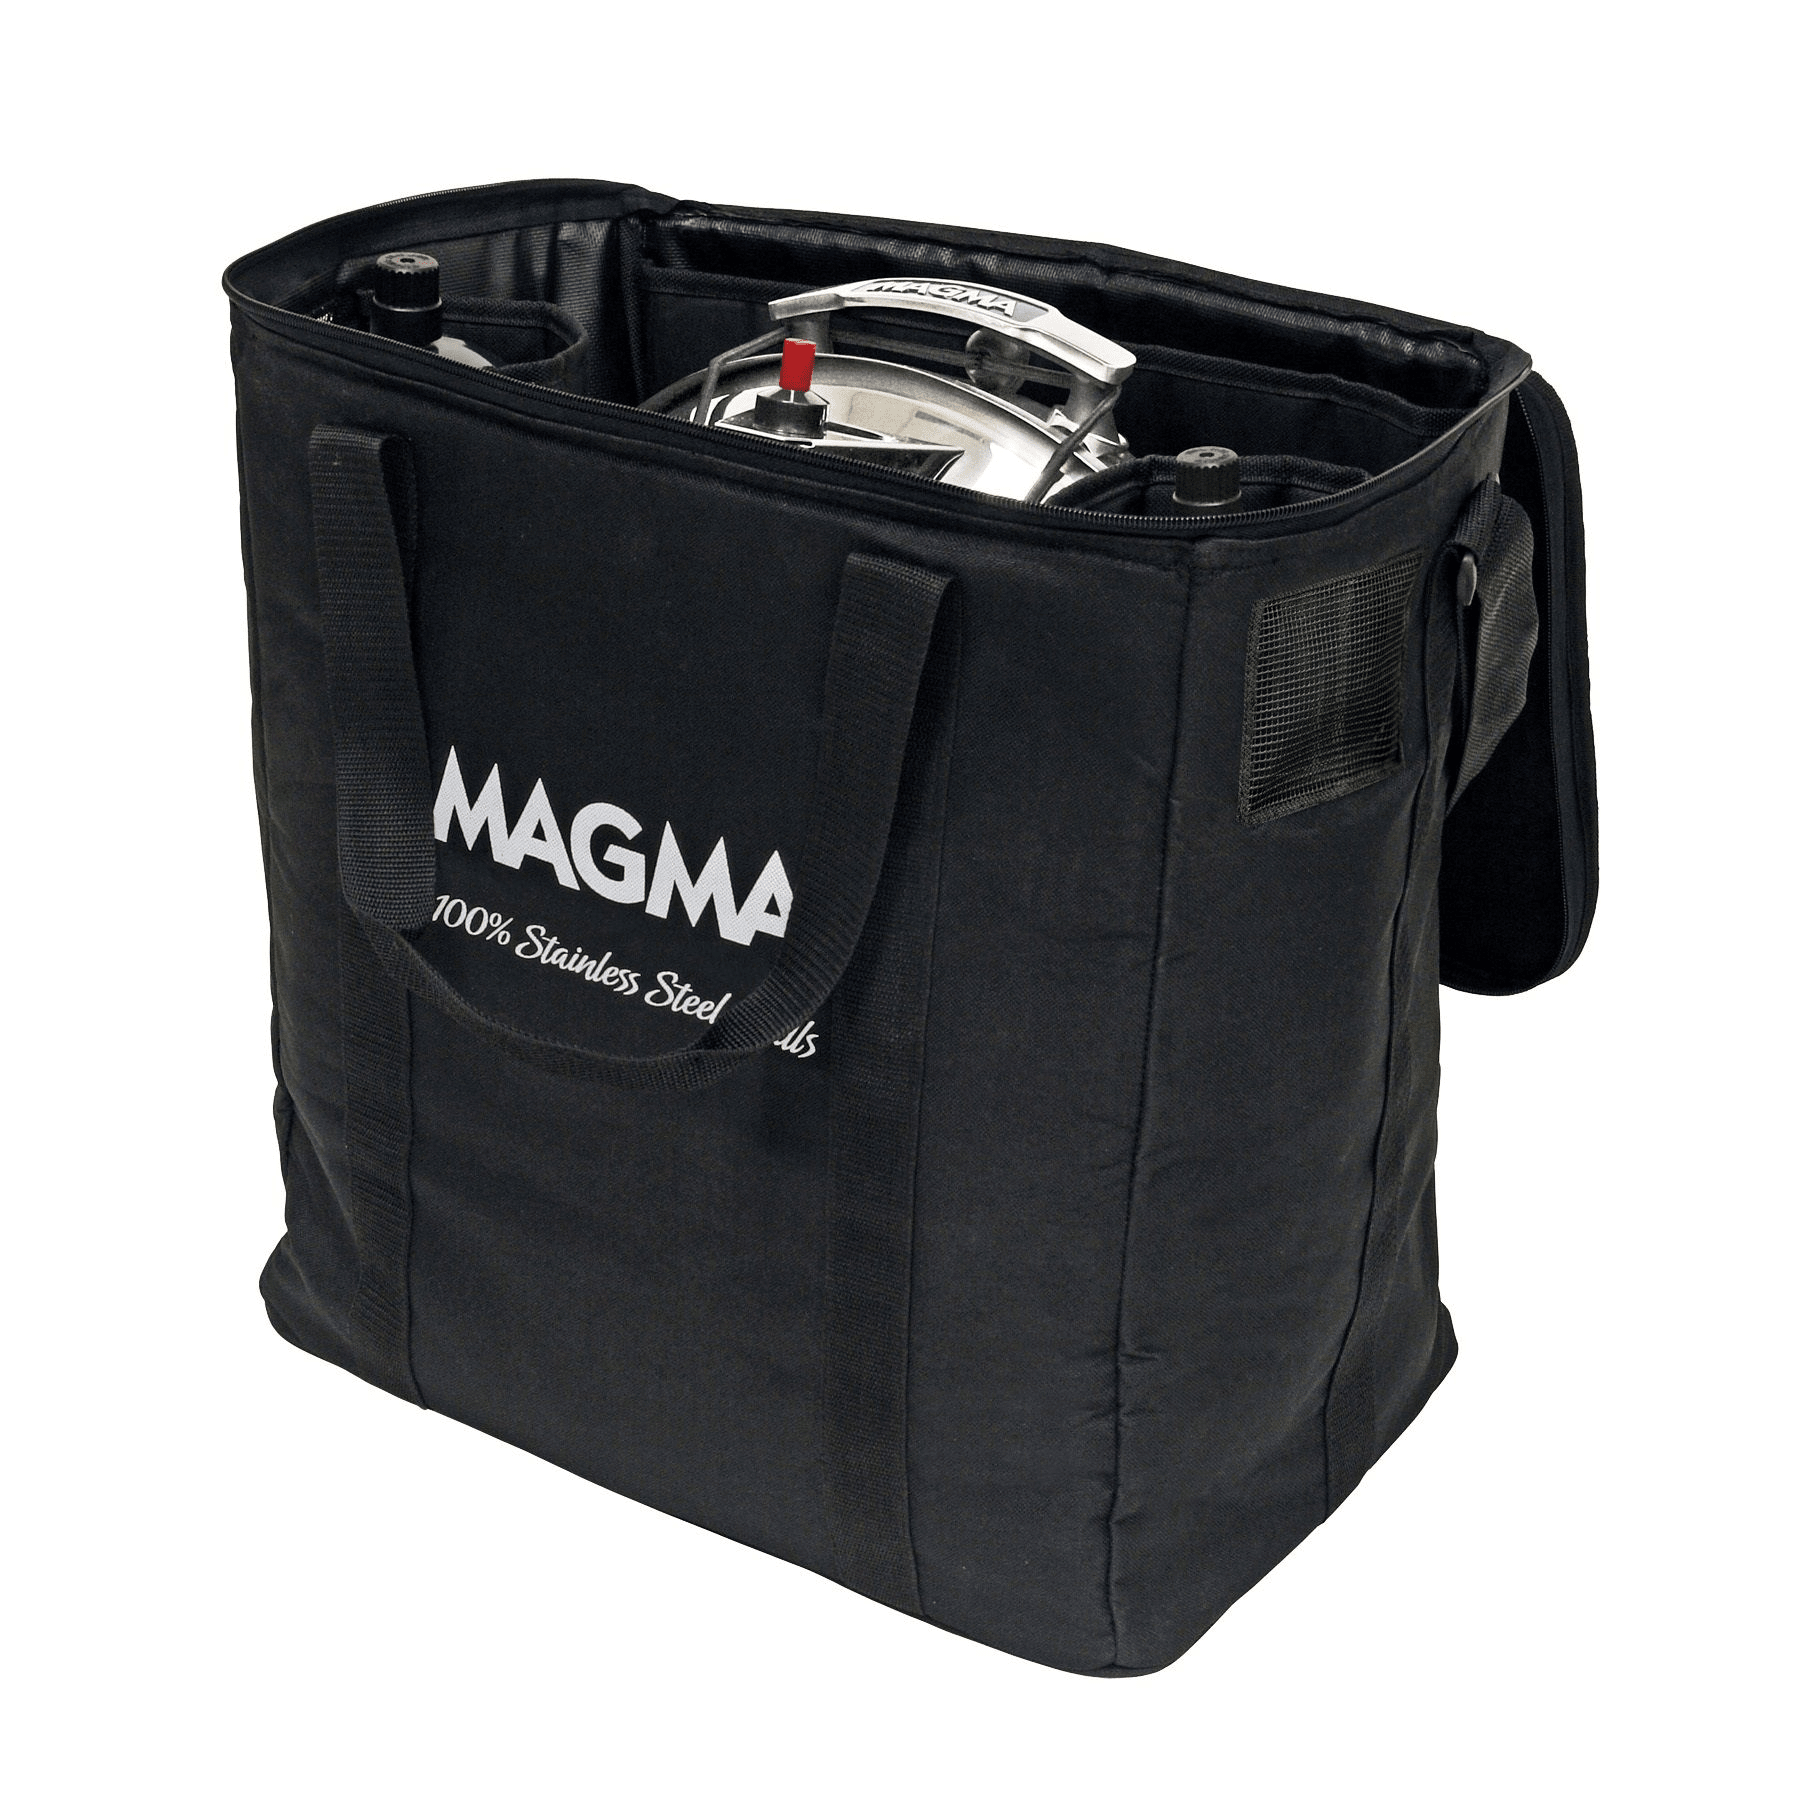 Magma Kettle Grill & Accessory Case - A10-991